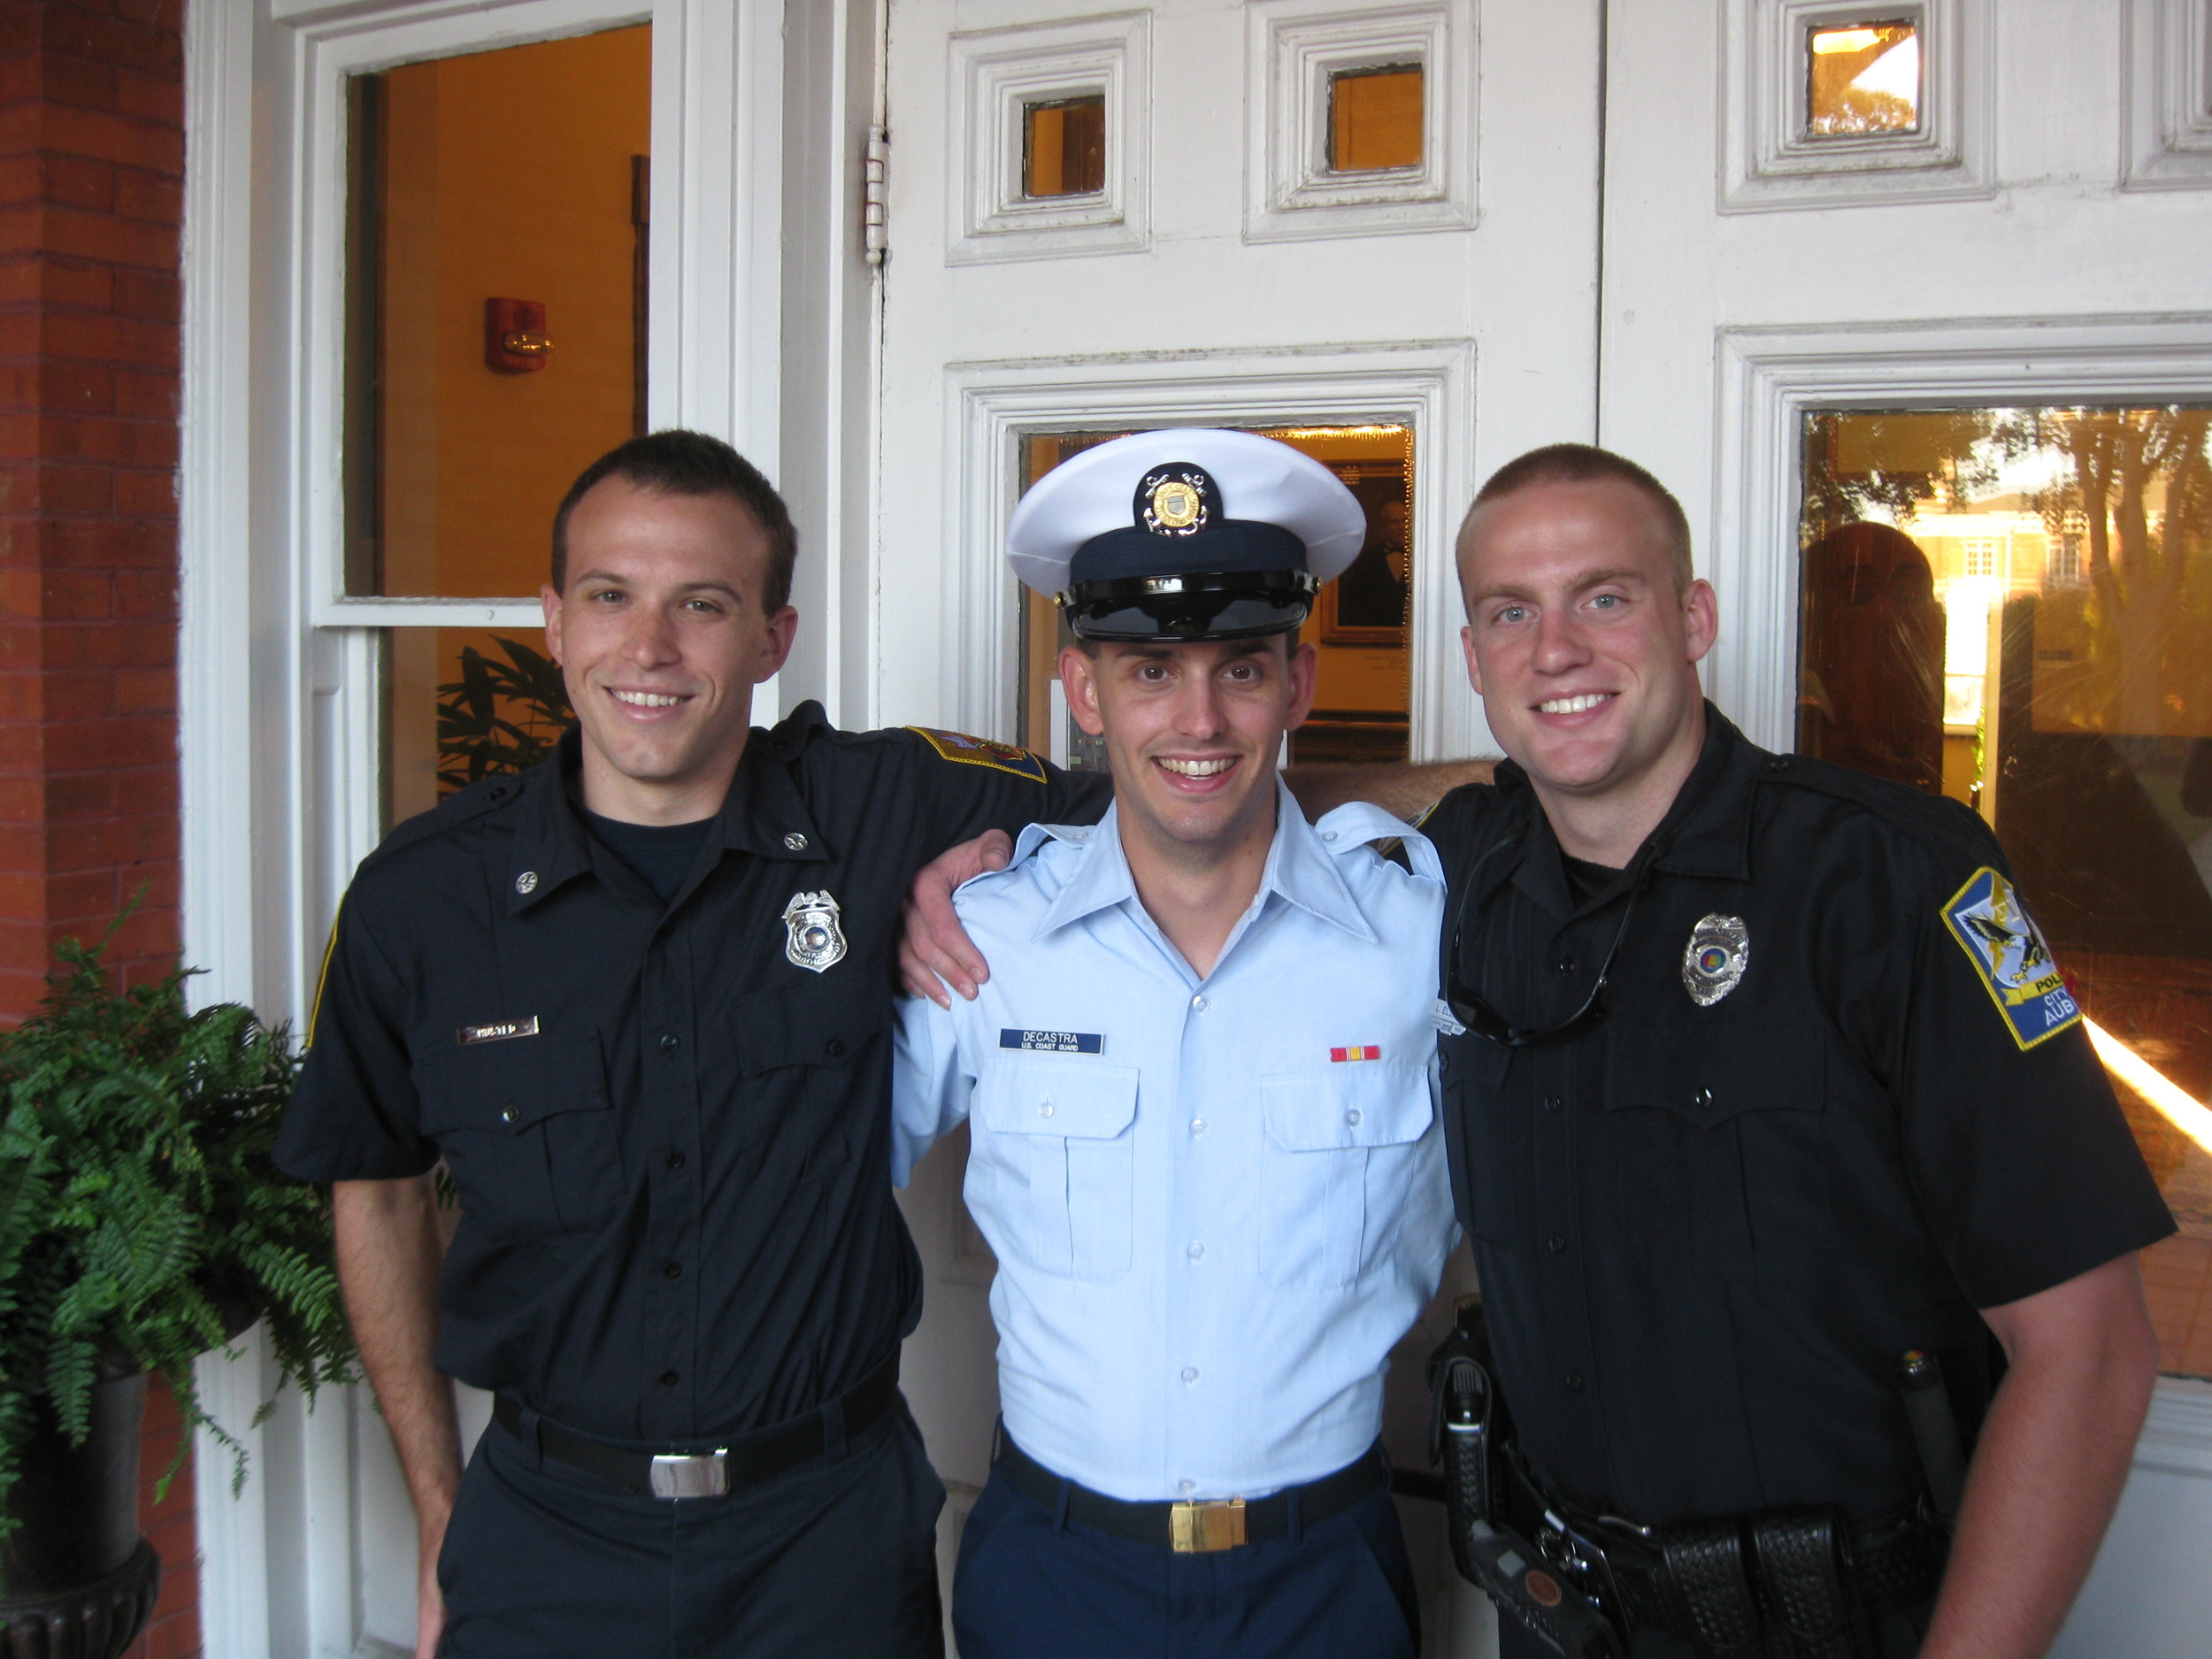  DeCastra, after graduating from TRACEN Cape May, gathers with Unit Auburn shipmates Andrew Husted (left) and Landon Elliot (right.) Mr. Husted currently works for the Auburn Fire Department and Mr. Elliot for the Auburn Police Department. Courtesy p